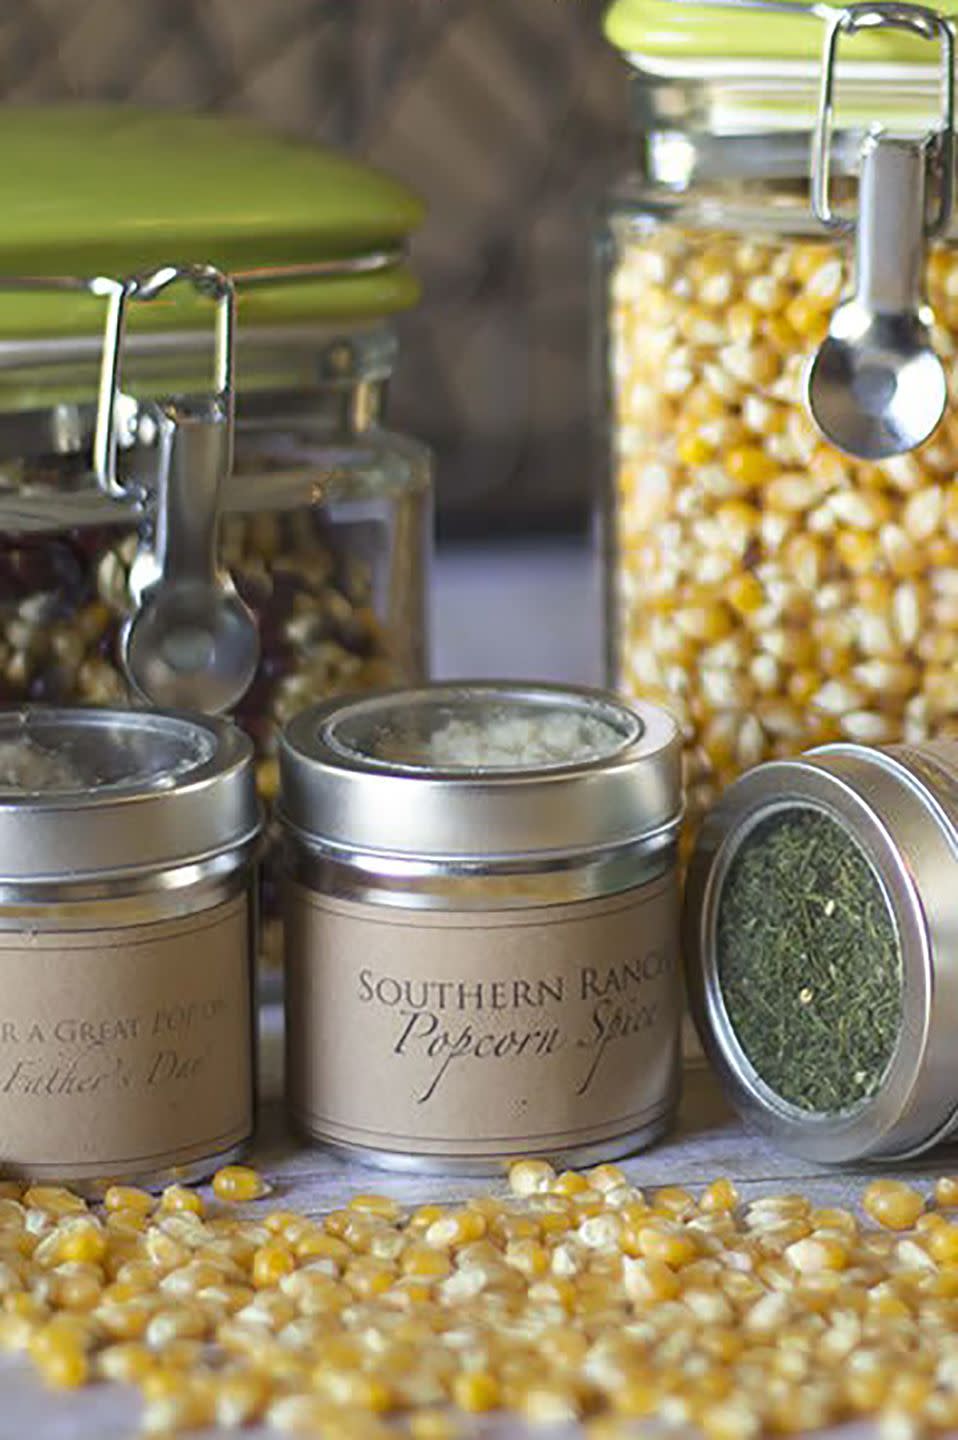 <p>This creative gift is perfect for dads who like to enjoy popcorn every time they watch a movie. You can whip up different seasonings with just four or five ingredients each!</p><p><strong>Get the tutorial at <a href="https://diyprojects.com/fathers-day-gift-ideas/" rel="nofollow noopener" target="_blank" data-ylk="slk:DIY Projects" class="link ">DIY Projects</a>. </strong></p><p><strong><a class="link " href="https://www.amazon.com/dp/B01FY69CPS?tag=syn-yahoo-20&ascsubtag=%5Bartid%7C10050.g.1171%5Bsrc%7Cyahoo-us" rel="nofollow noopener" target="_blank" data-ylk="slk:Shop Now">Shop Now</a></strong></p>